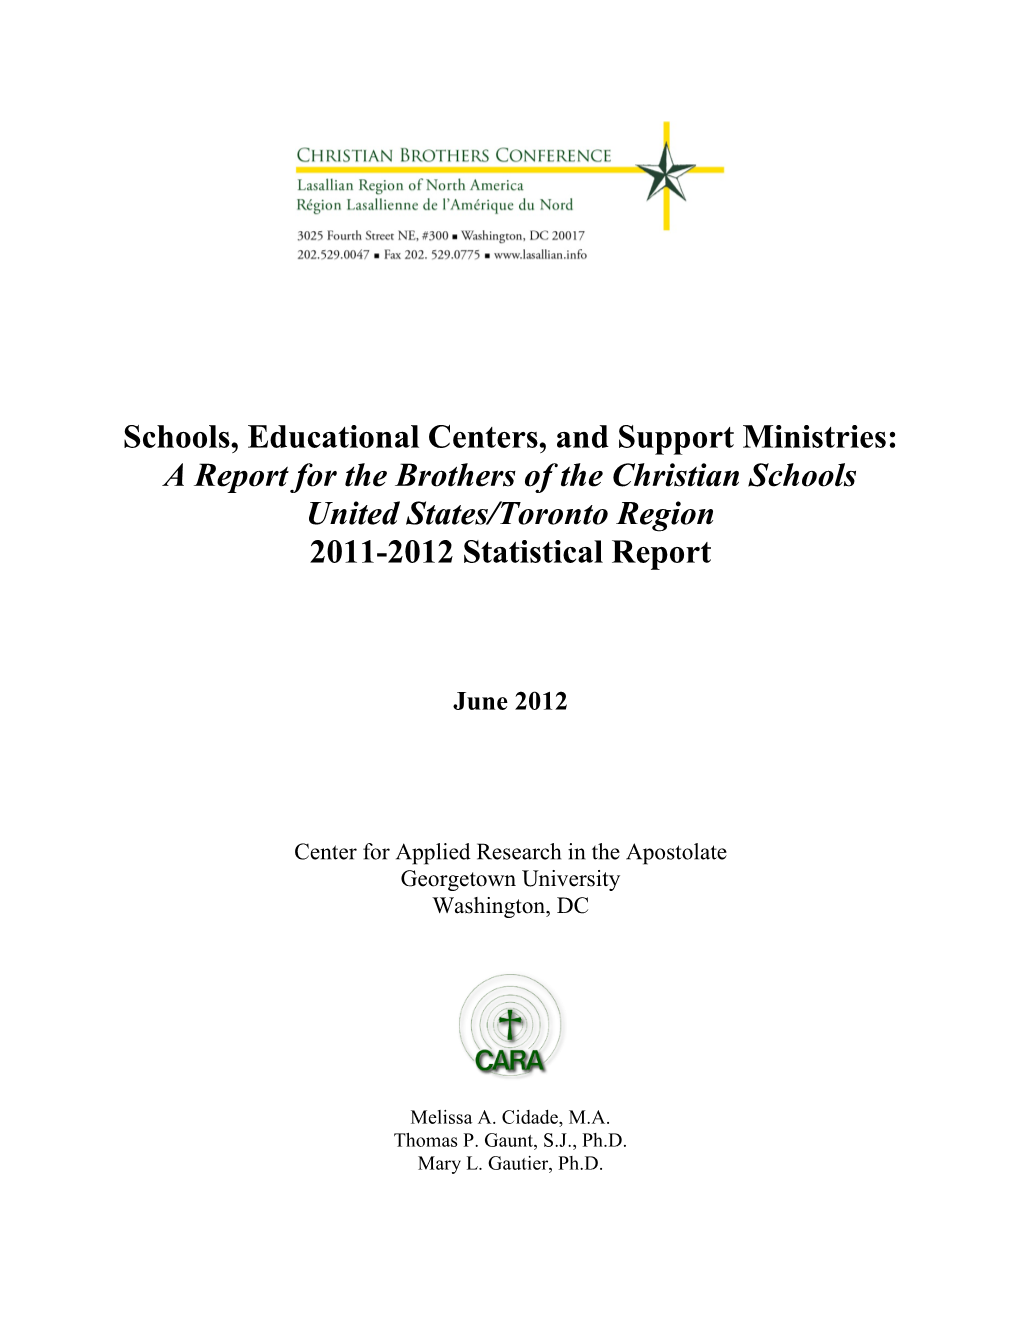 A Report for the Brothers of the Christian Schools United States/Toronto Region 2011-2012 Statistical Report